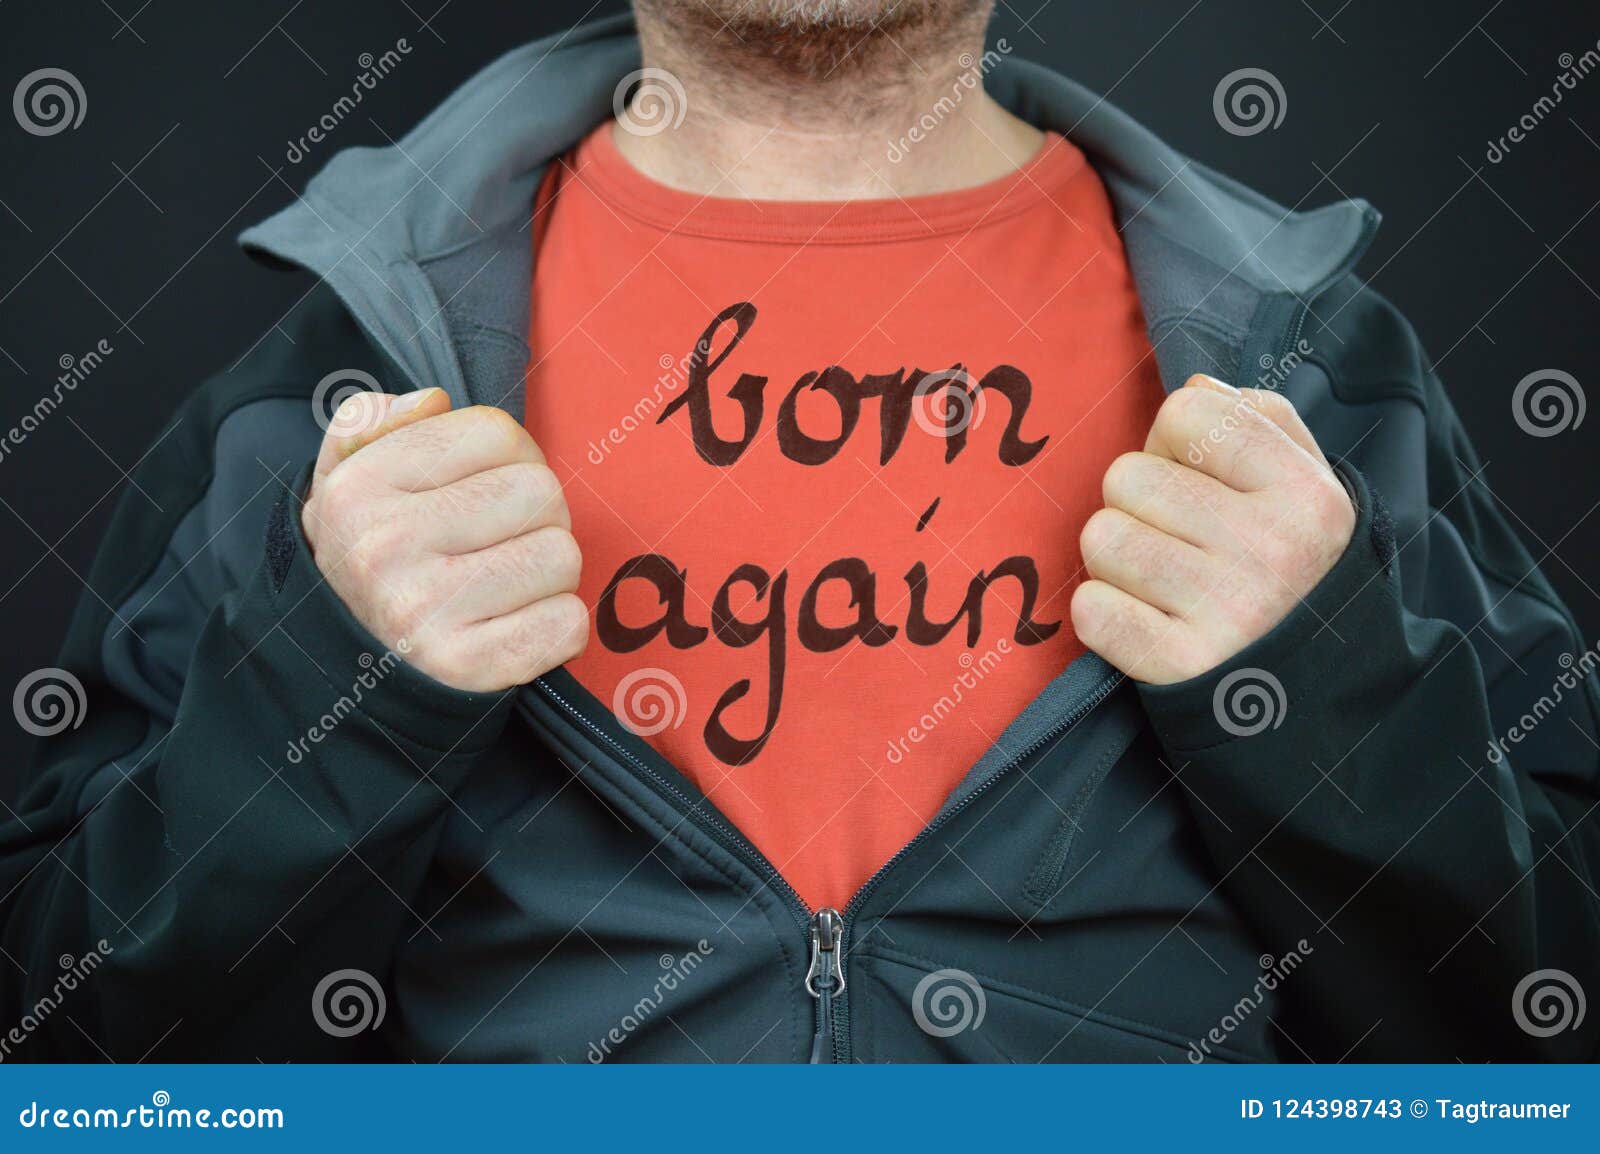 man with words born again on his red t-shirt